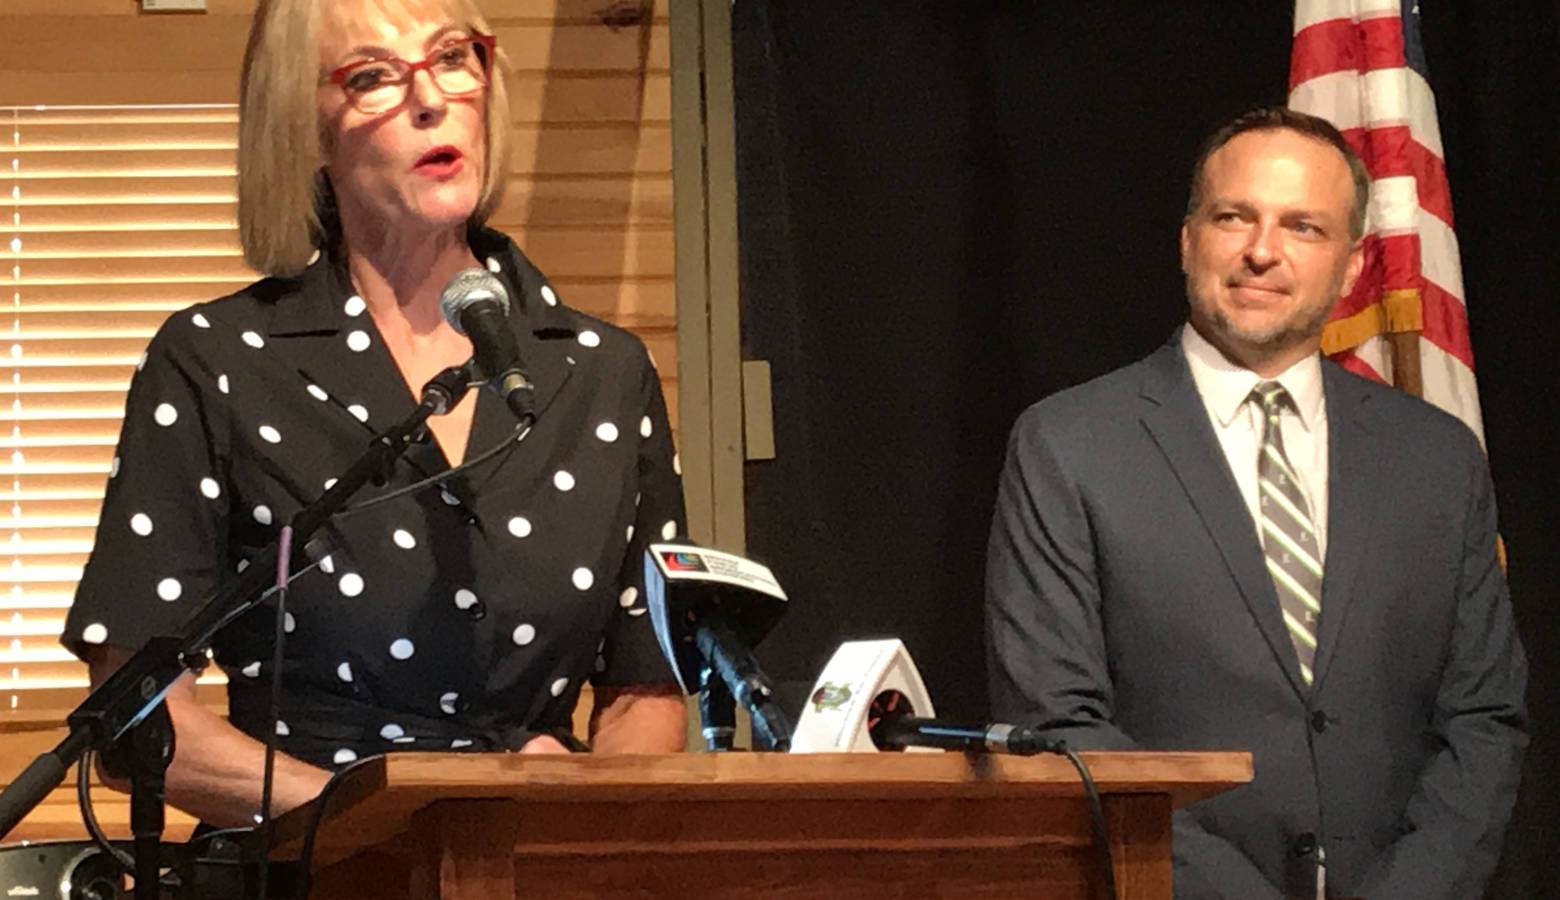 Lt. Gov. Suzanne Crouch announced the creation of a cabinet-level position to help expand affordable broadband solutions for rural communities. Scott Rudd, right, will serve as Director of Broadband Opportunities. (Brandon Smith/IPB News)